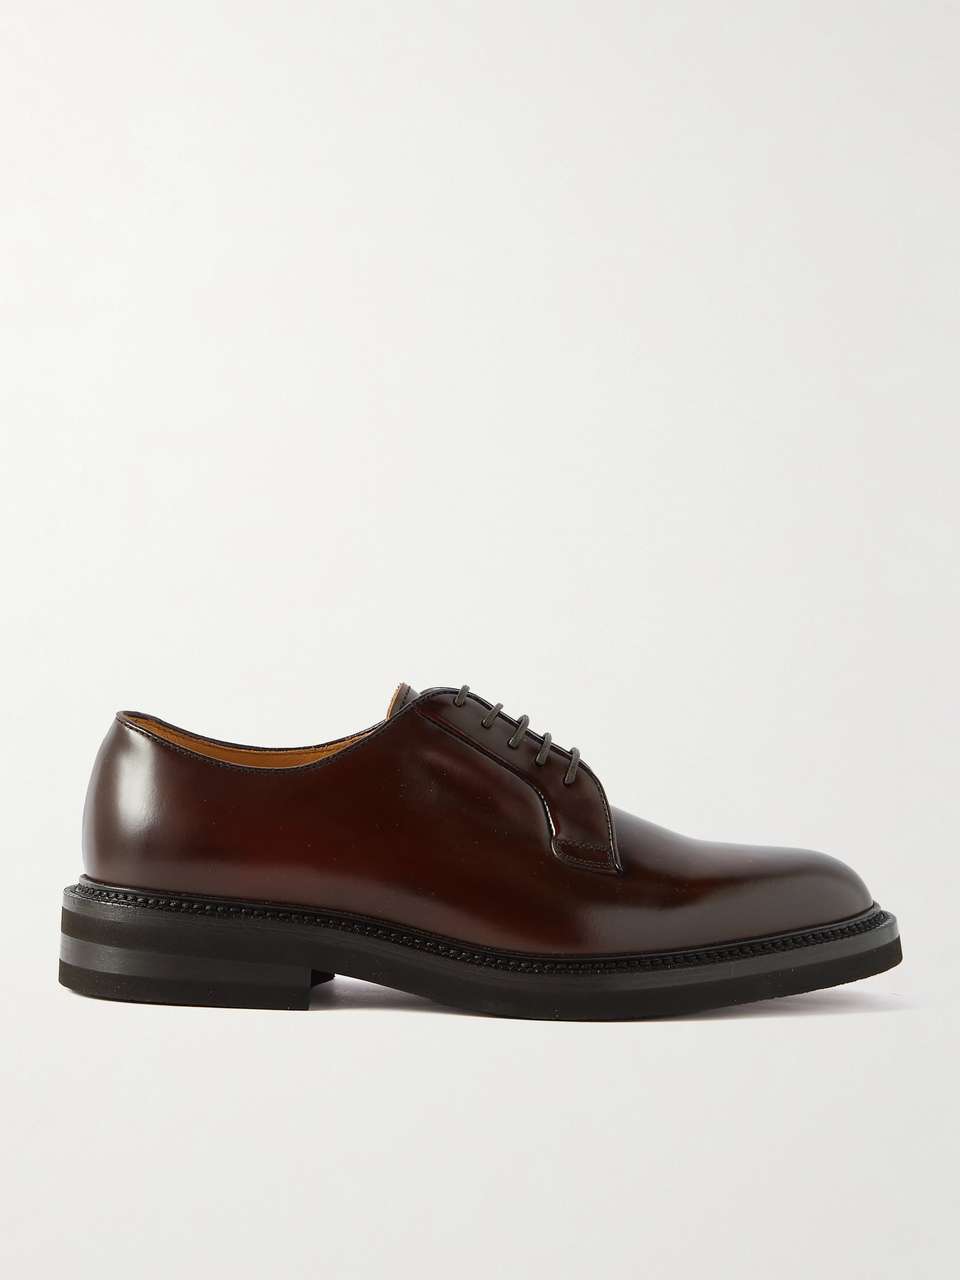 BRUNELLO CUCINELLI Glossed-Leather Derby Shoes | MR PORTER